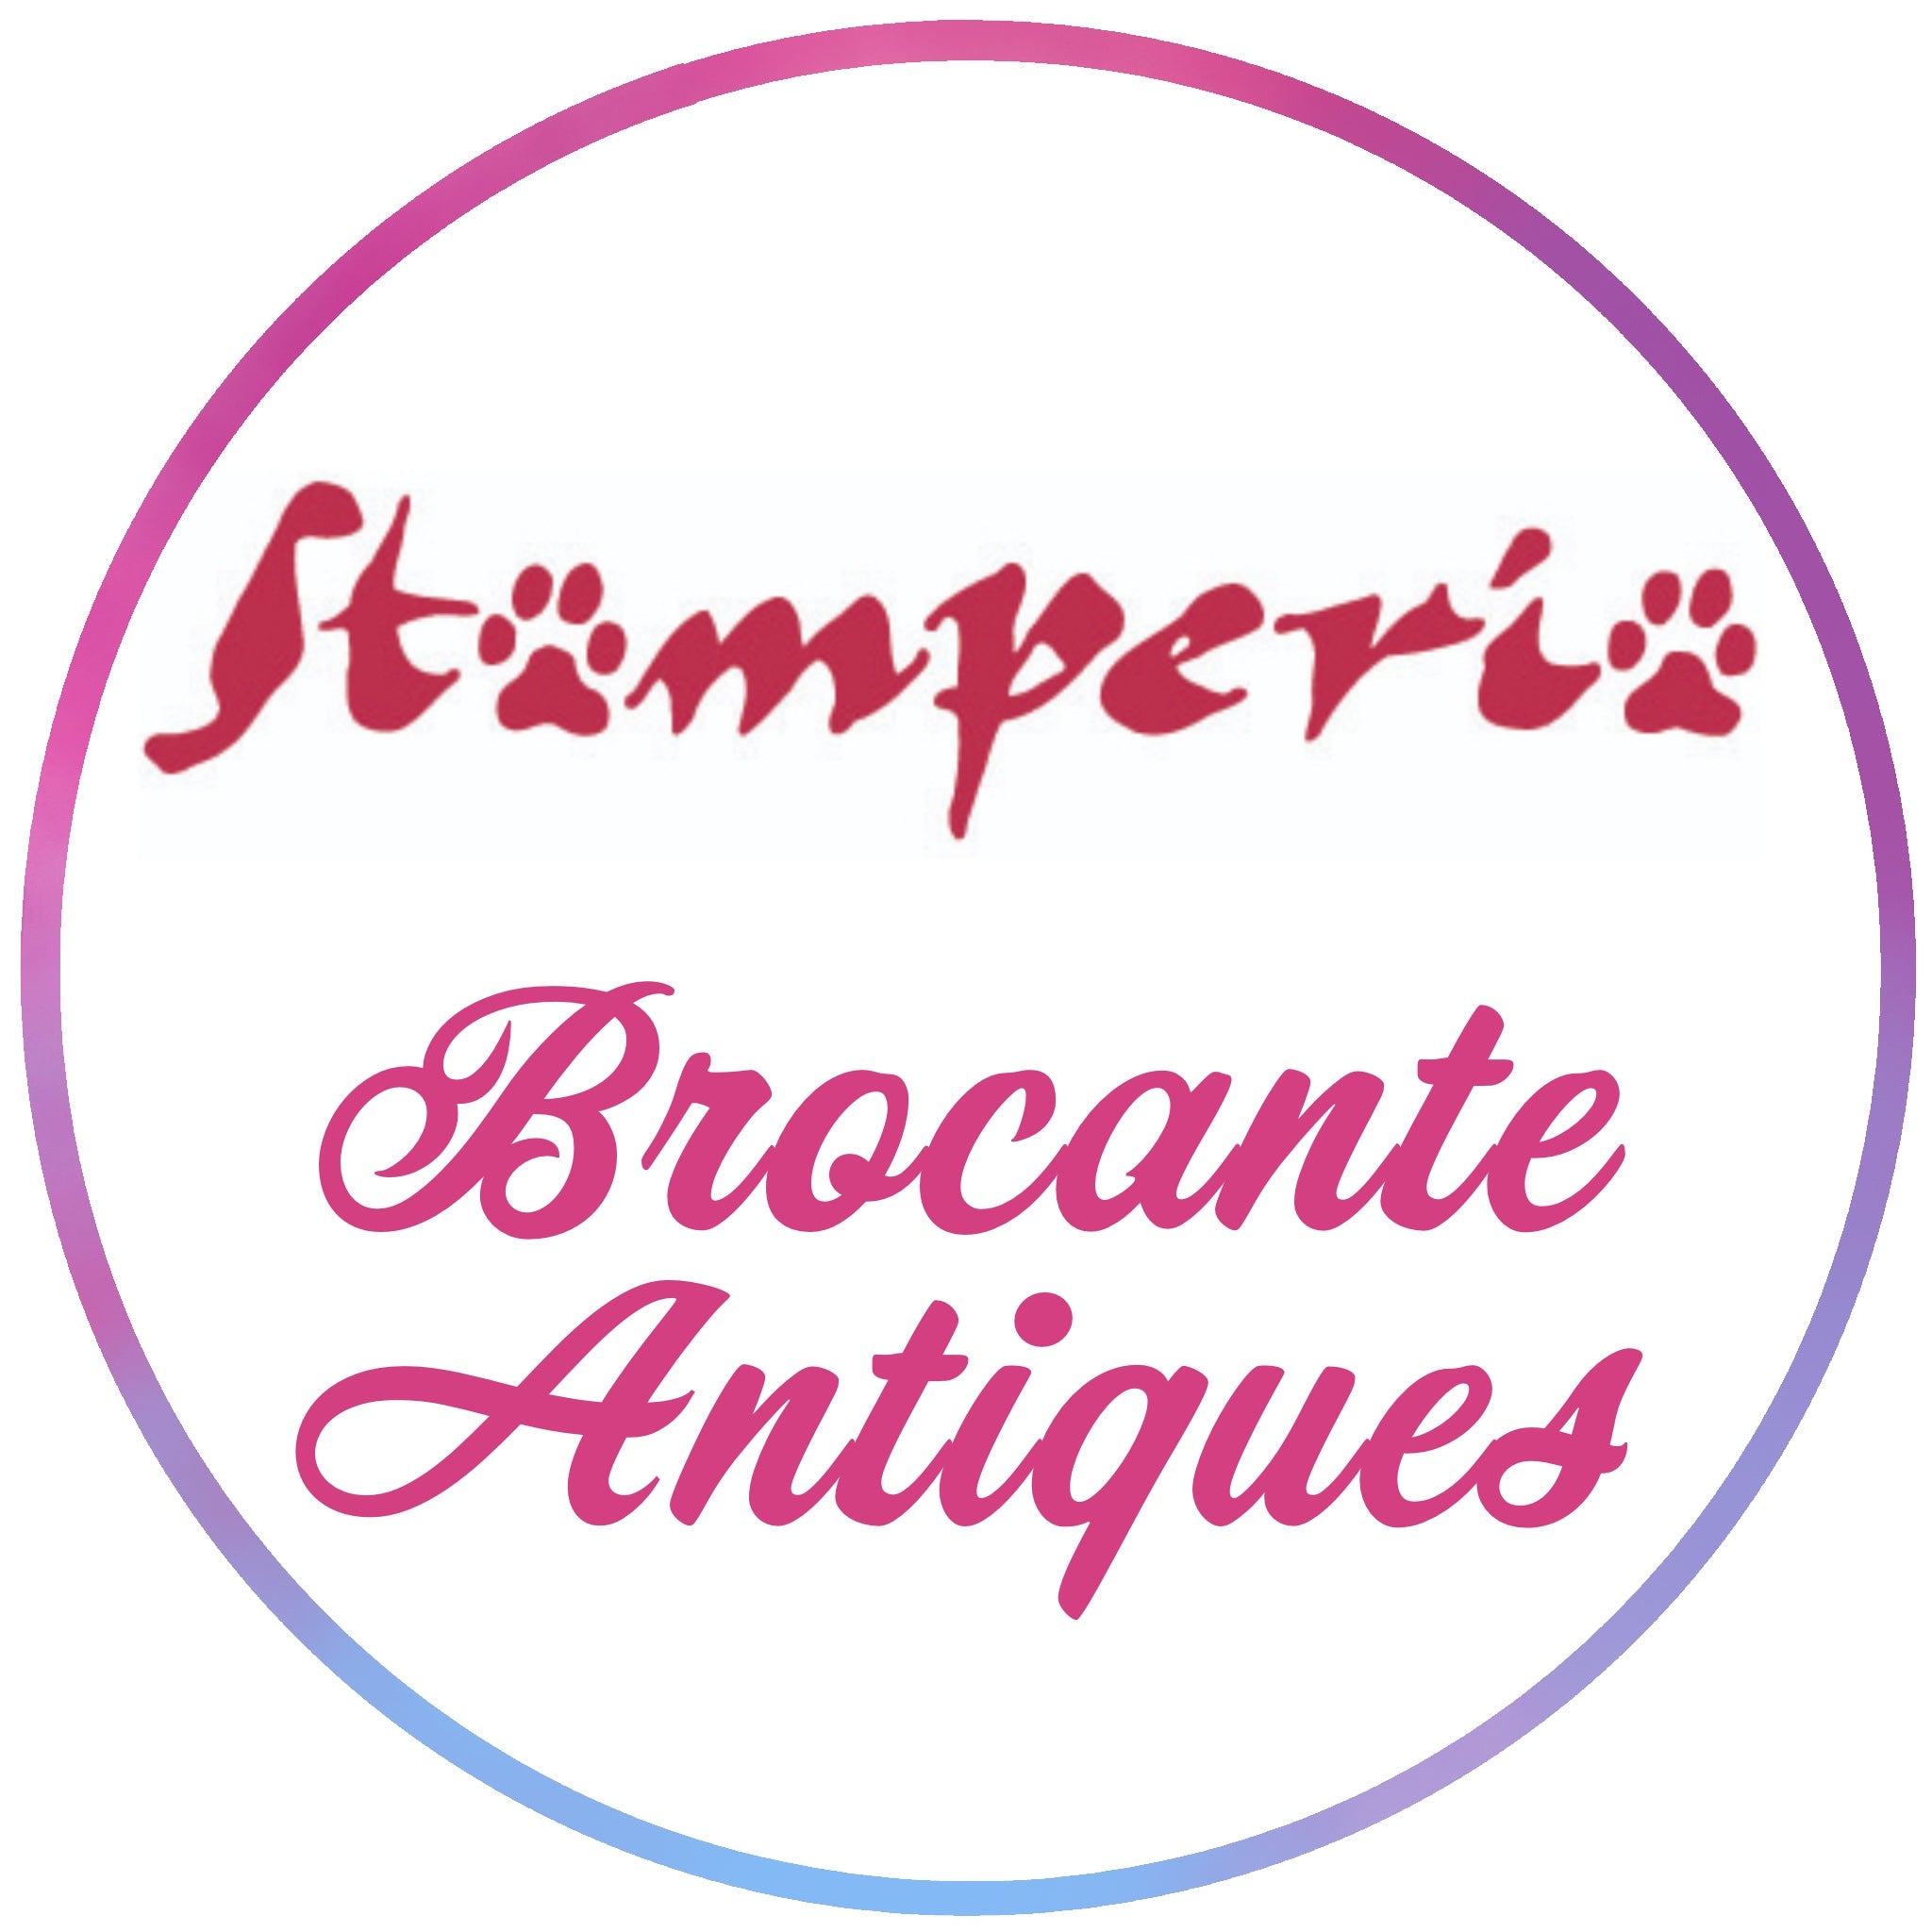 BUY IT ALL: Stamperia Brocante Antiques Collection